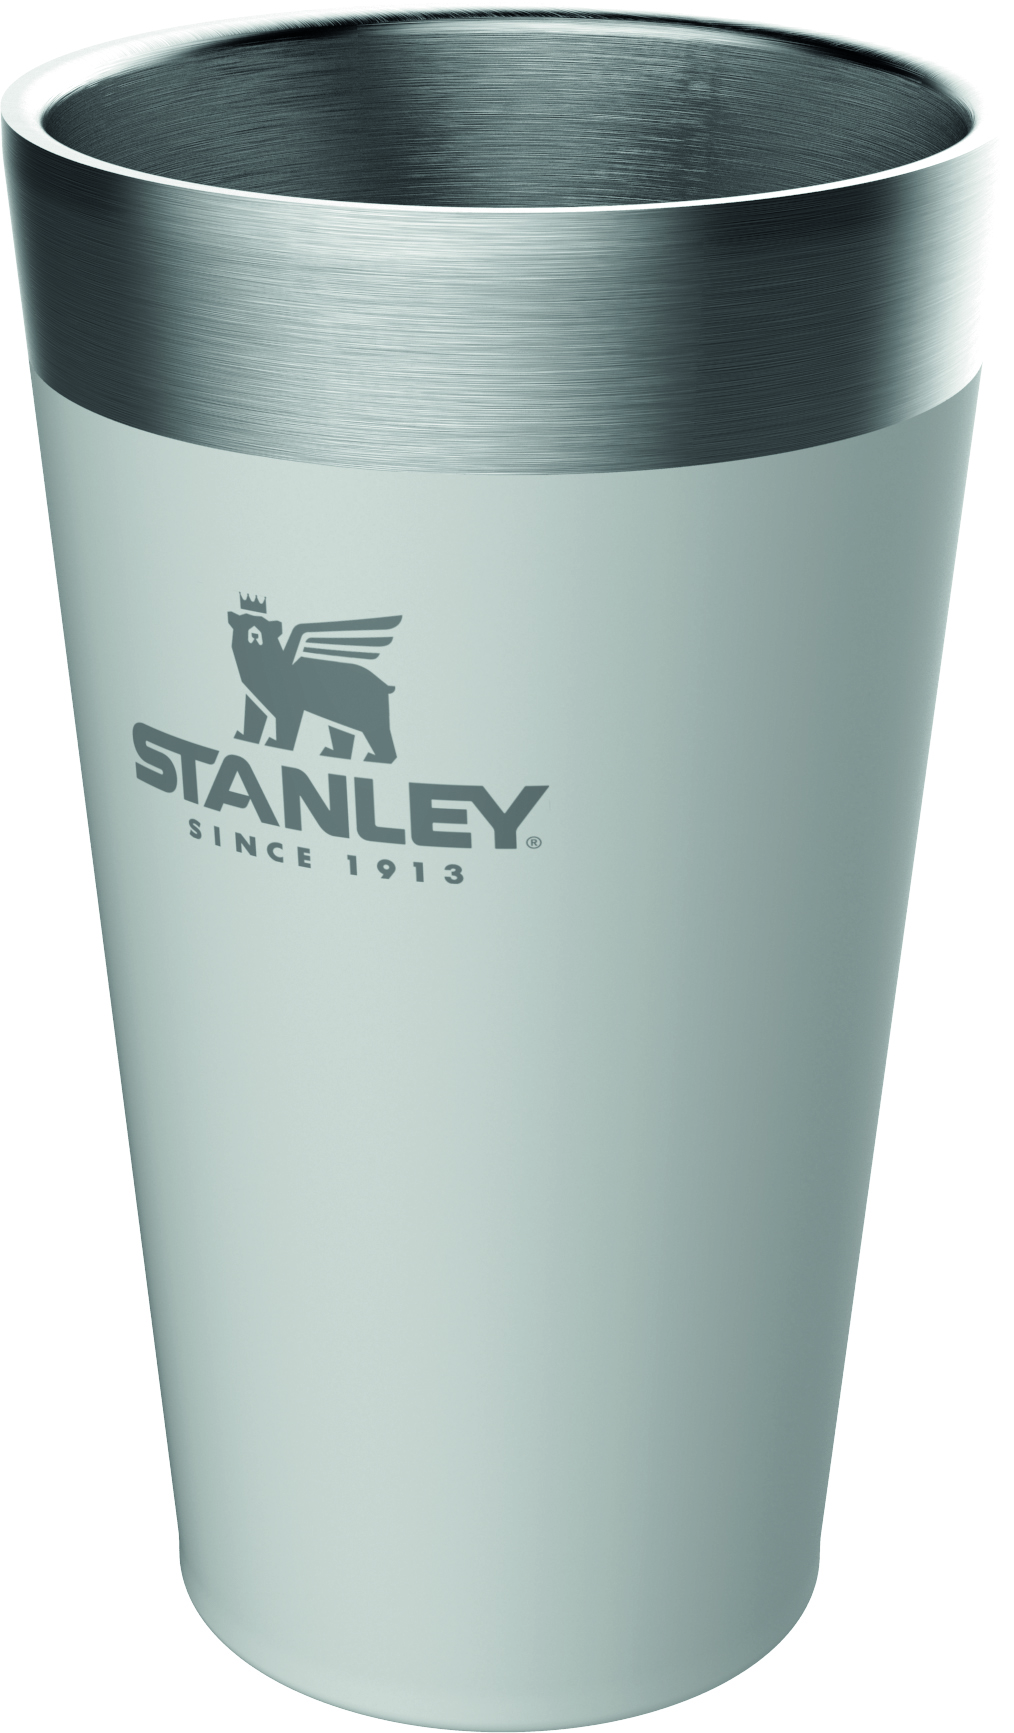 https://promotionway.com/data/shopproducts/885/stanley-adventure-stacking-beer-pint-0-47-l.jpg